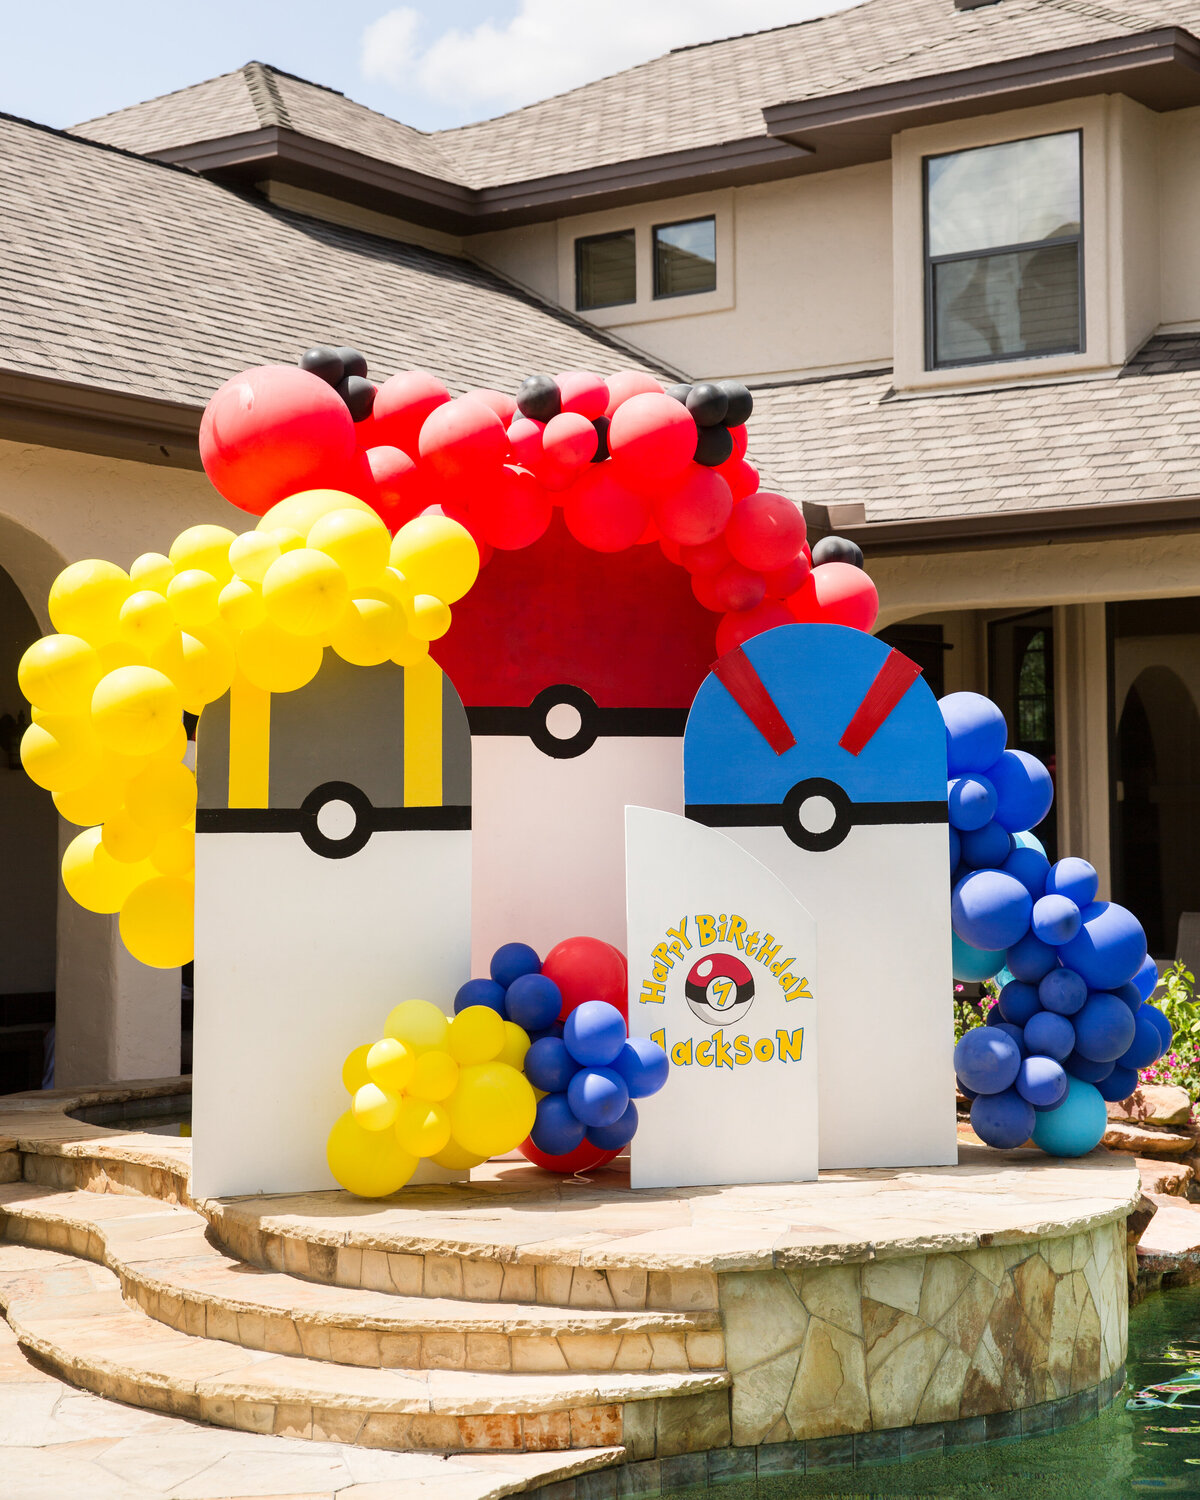 Pokemon themed childrens birthday arch backdrop design with primary colored balloon arches